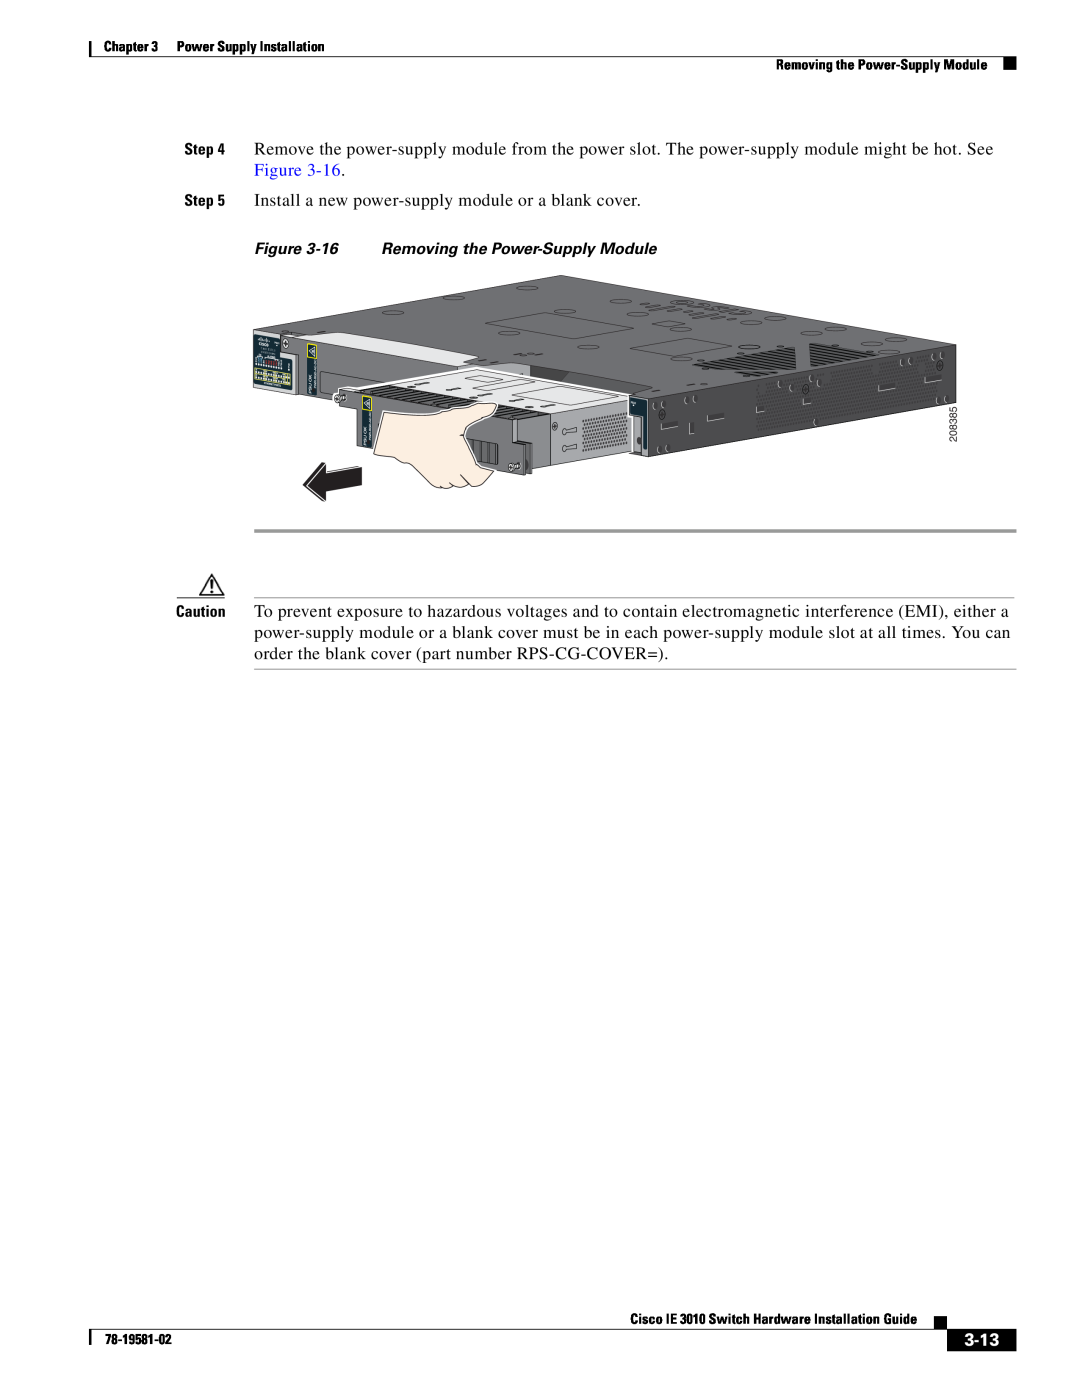 Cisco Systems IE301024TC manual 3-13, Install a new power-supply module or a blank cover 